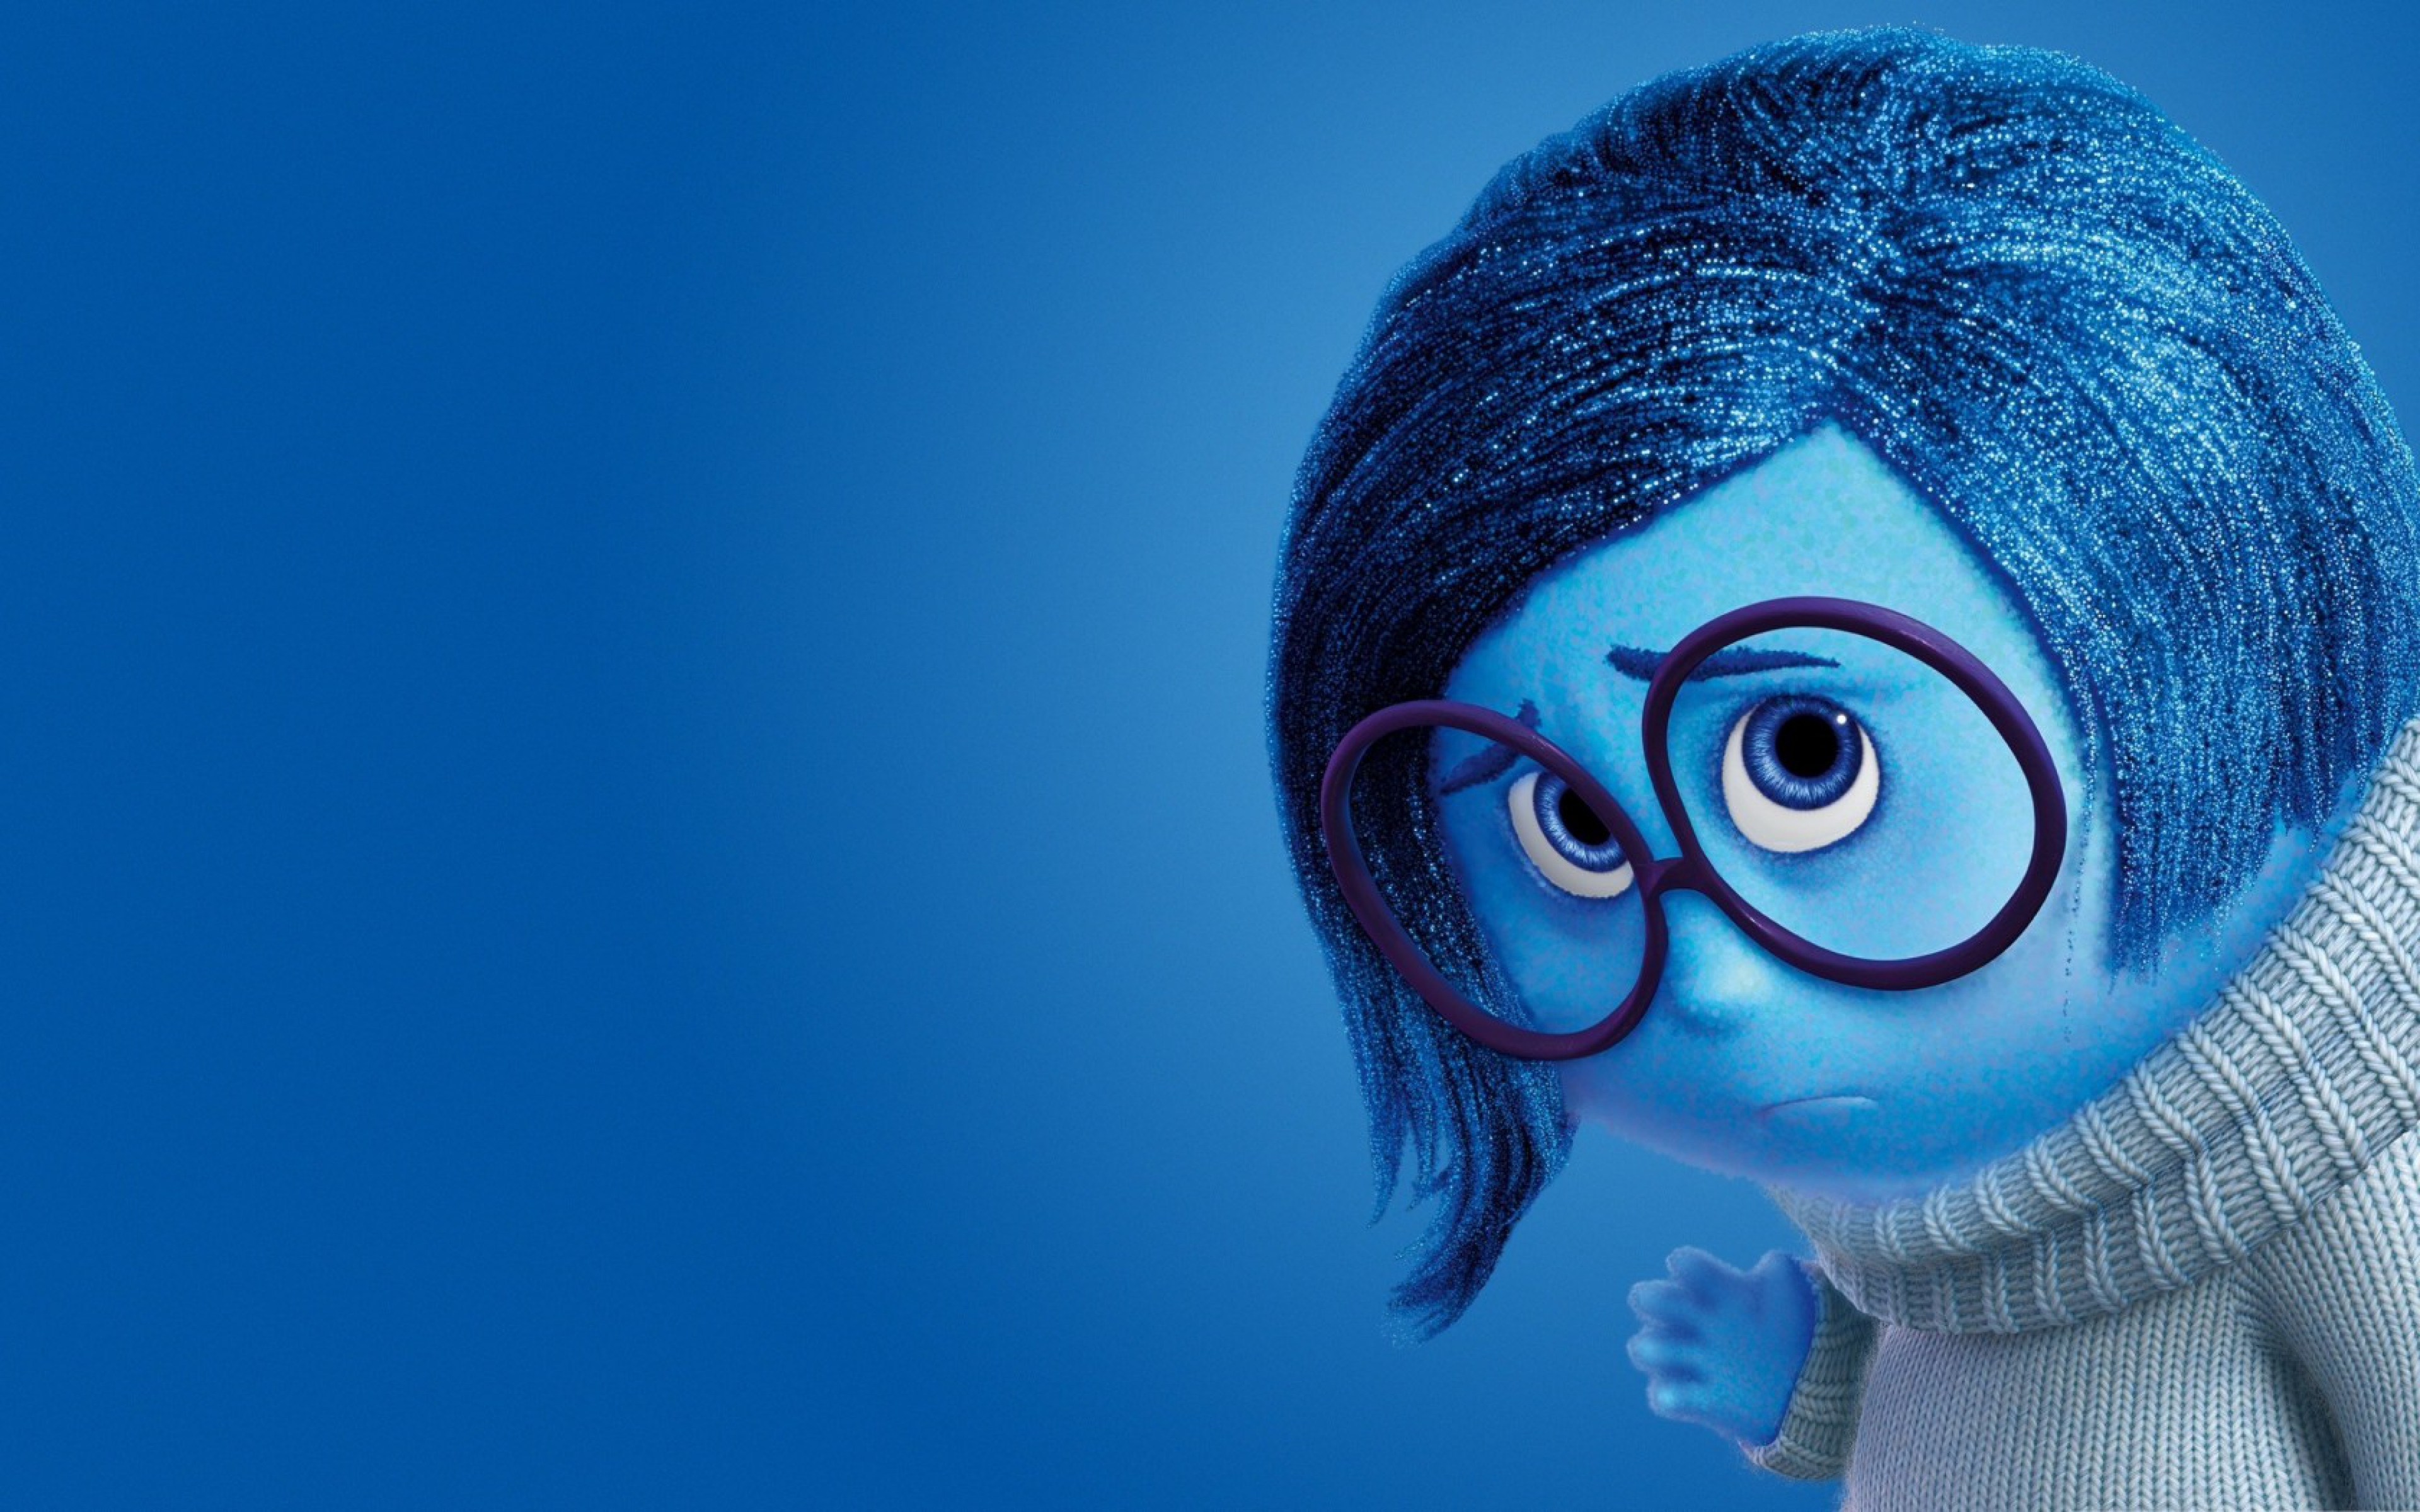 Blue Hair Girl from Inside Out - wide 4